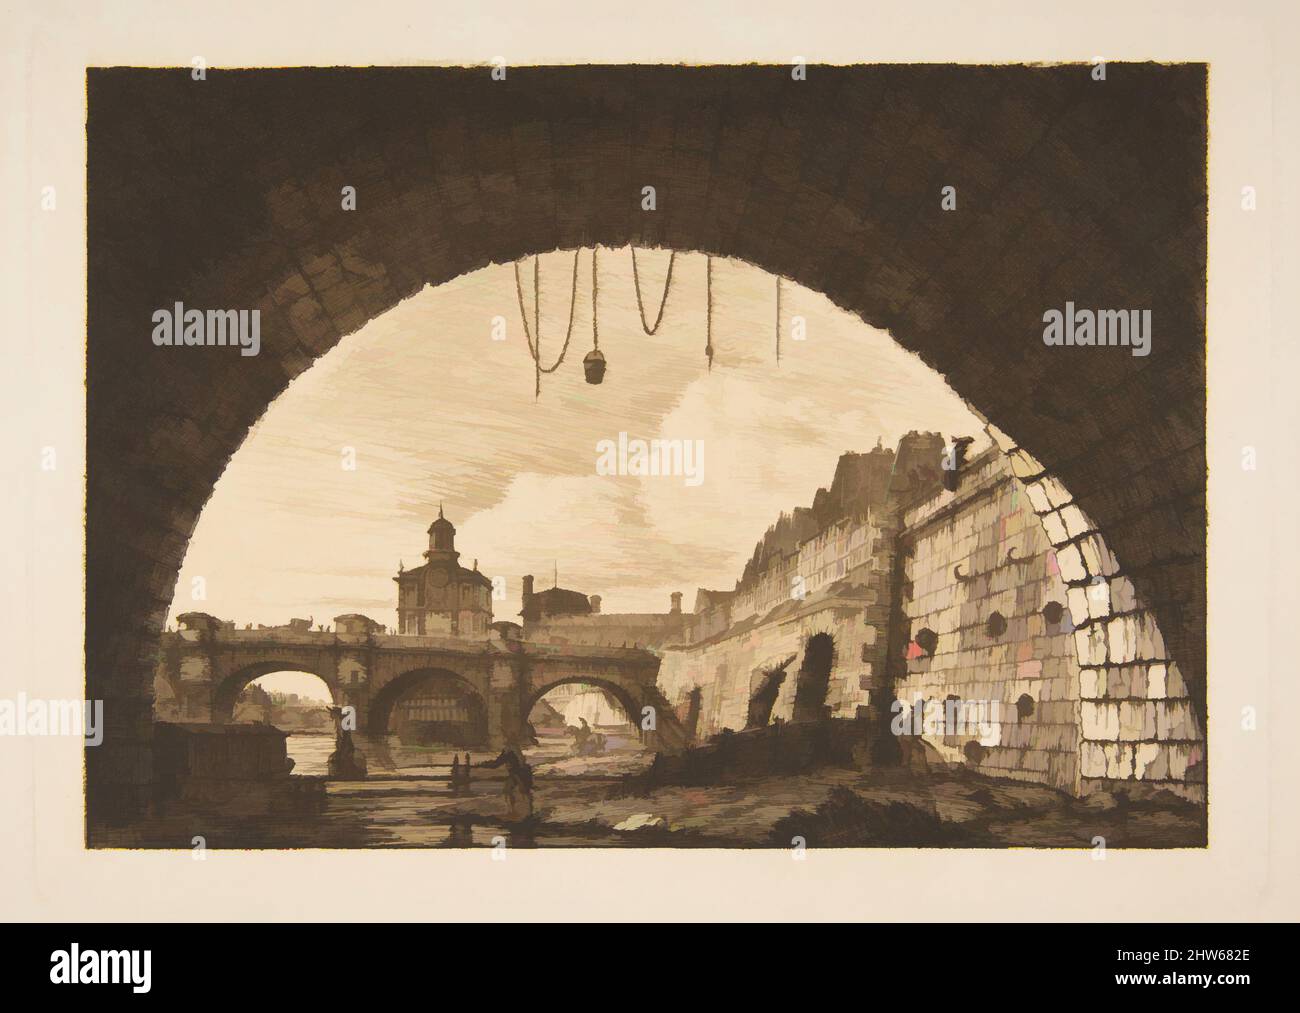 Art inspired by Le Pont-neuf et la Samartaine de dessous la première arche du Pont-au-Change (Pont-neuf and the Samartaine seen from under the first arch of the Pont-au-Change, Paris, after Nicolle), 1855, Etching with engraving, plate: 5 3/4 x 8 in. (14.6 x 20.3 cm), Prints, Charles, Classic works modernized by Artotop with a splash of modernity. Shapes, color and value, eye-catching visual impact on art. Emotions through freedom of artworks in a contemporary way. A timeless message pursuing a wildly creative new direction. Artists turning to the digital medium and creating the Artotop NFT Stock Photo